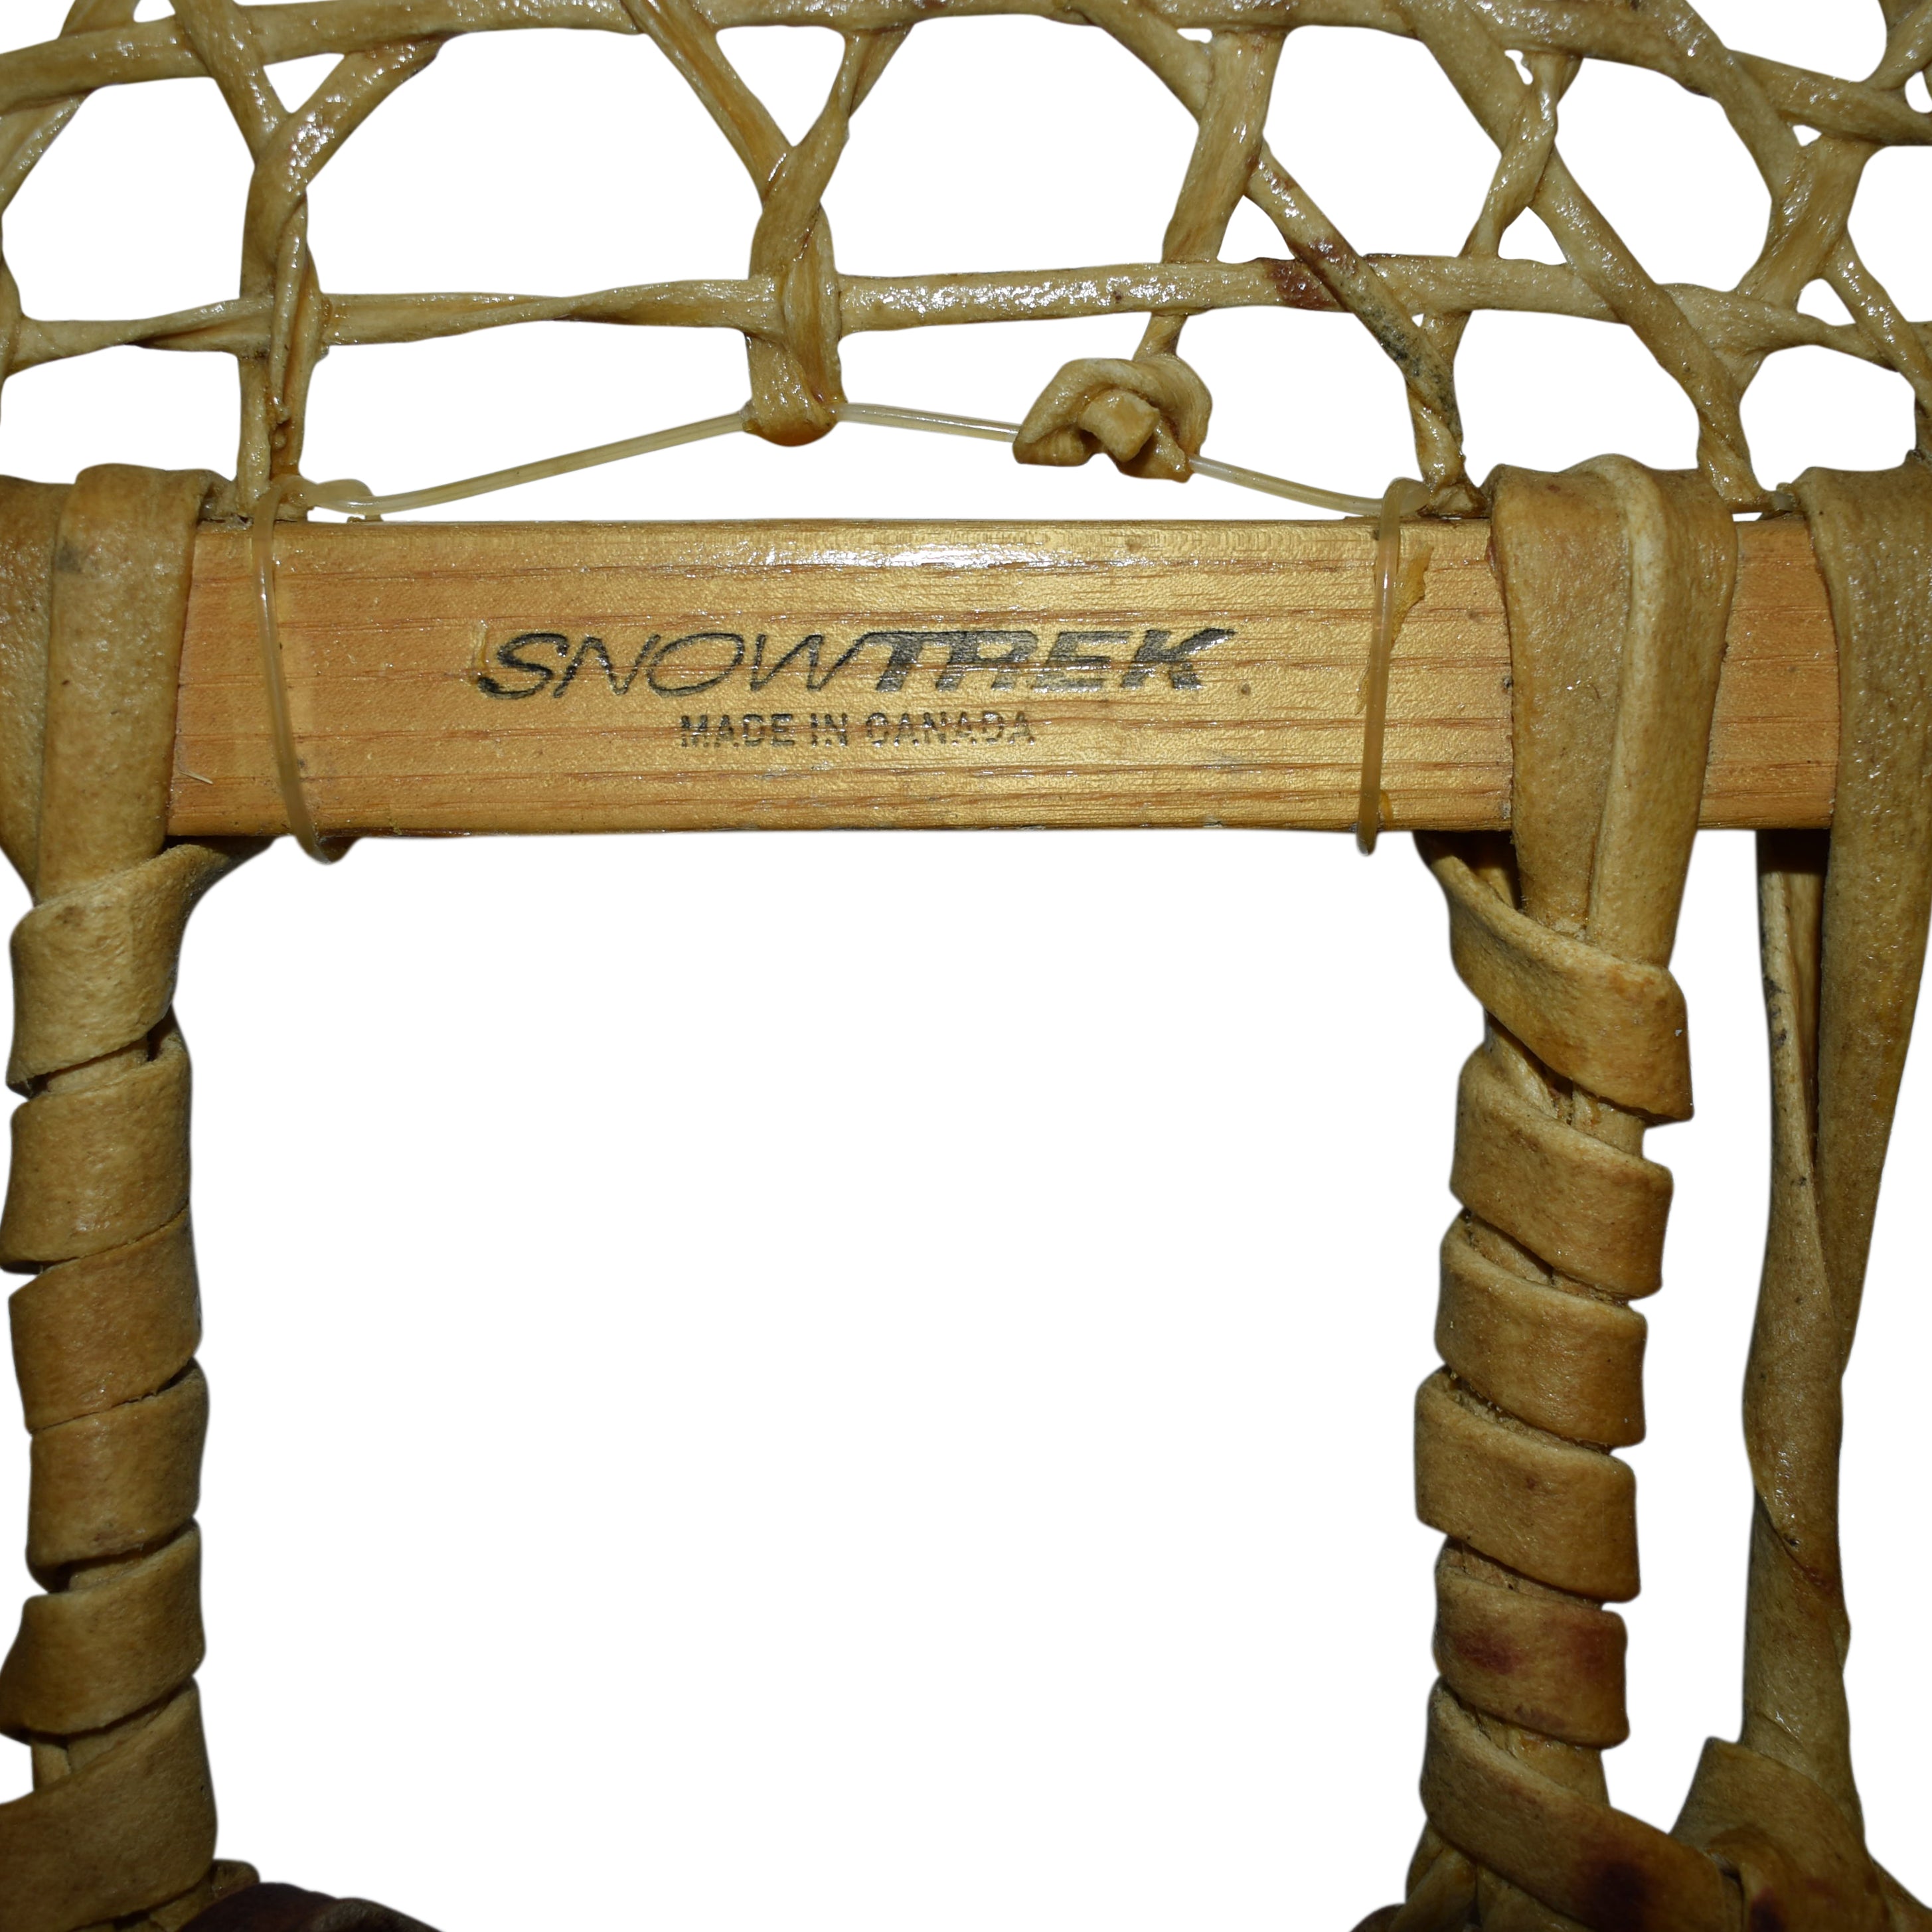 Canadian Huron Snowshoes by Snowtrek